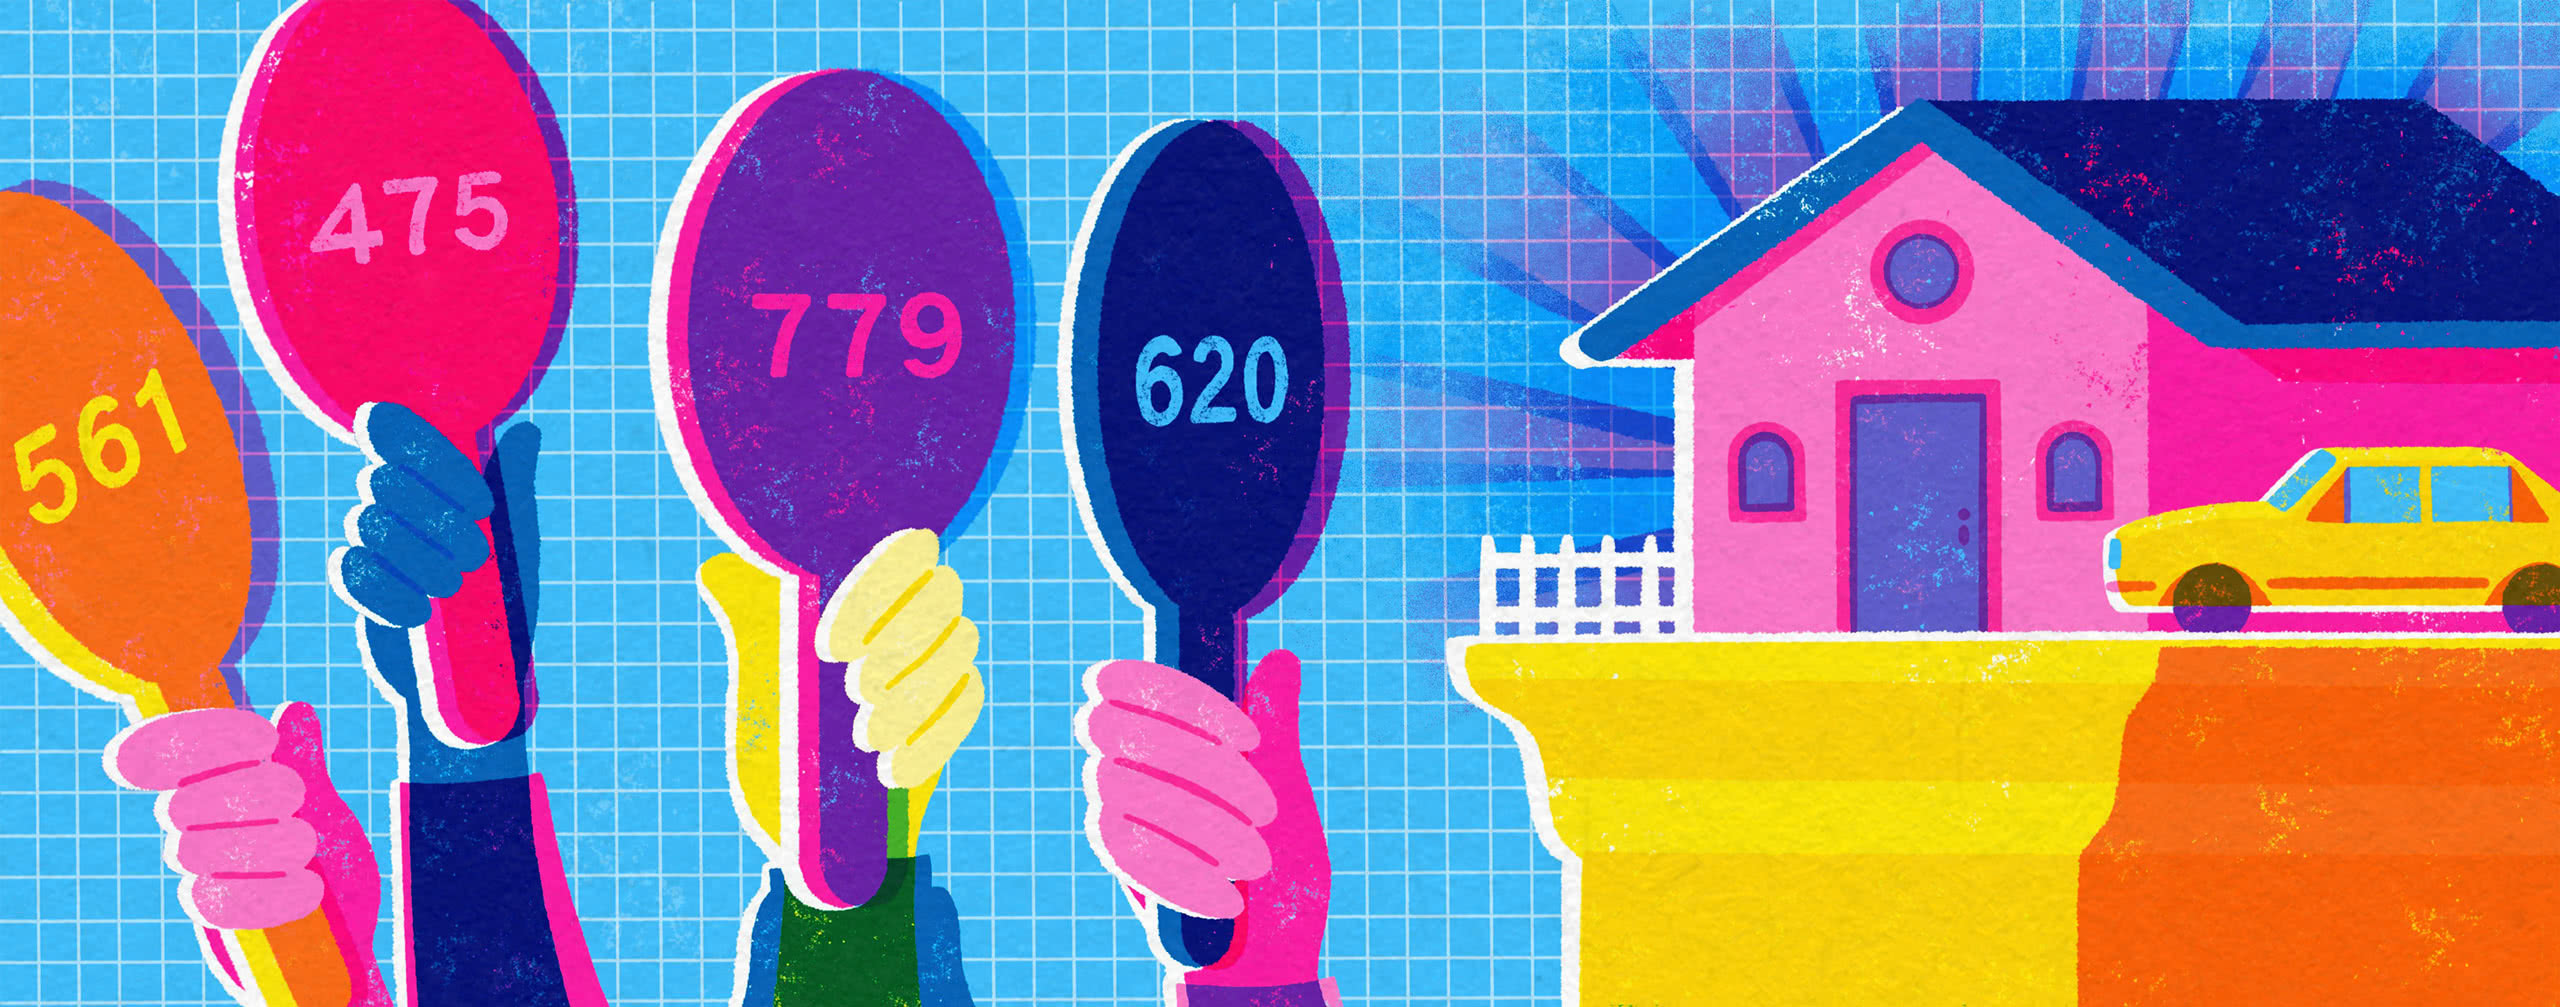 stylized graphic of a home and hands holding up paddles depicting different credit score values on each